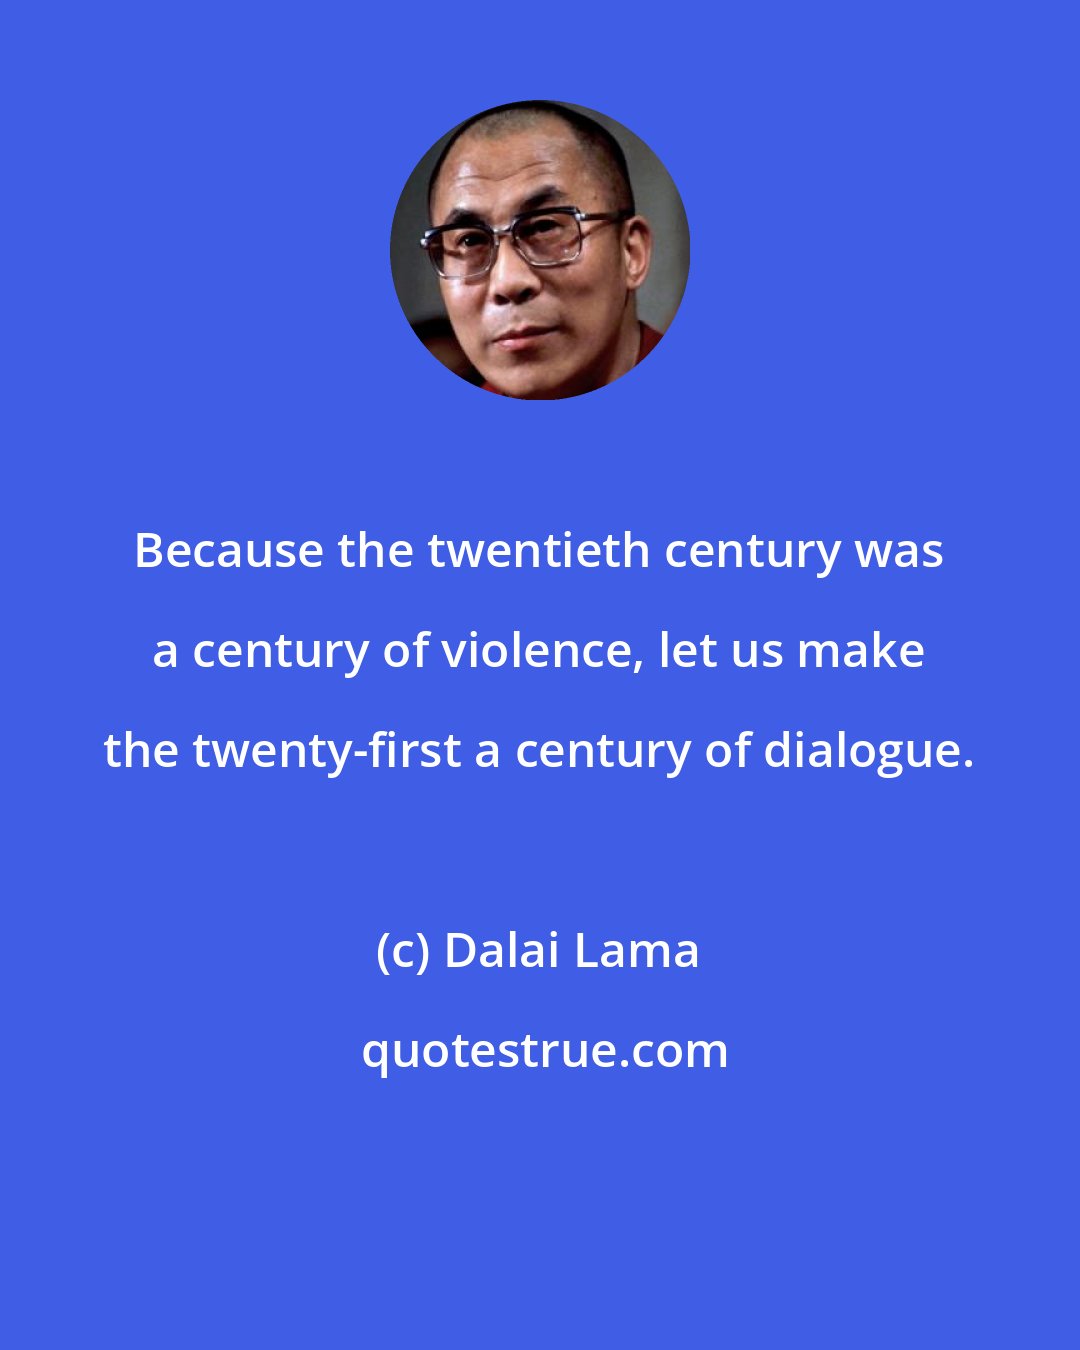 Dalai Lama: Because the twentieth century was a century of violence, let us make the twenty-first a century of dialogue.